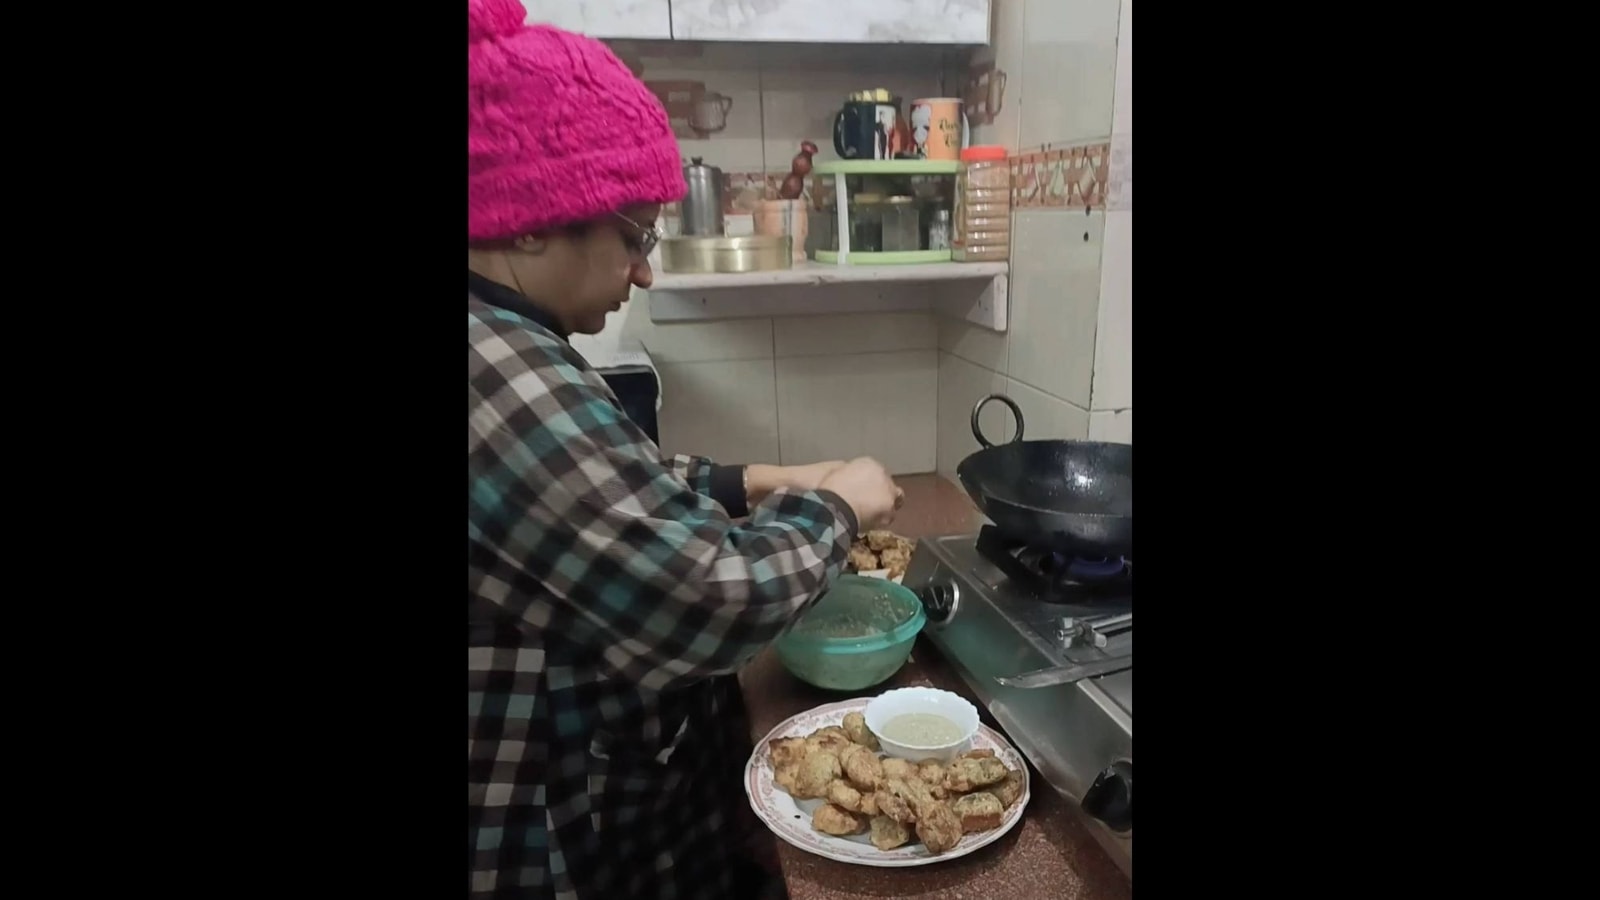 Desi mom convinces her son who is on diet to eat pakoras. Watch how |  Trending - Hindustan Times